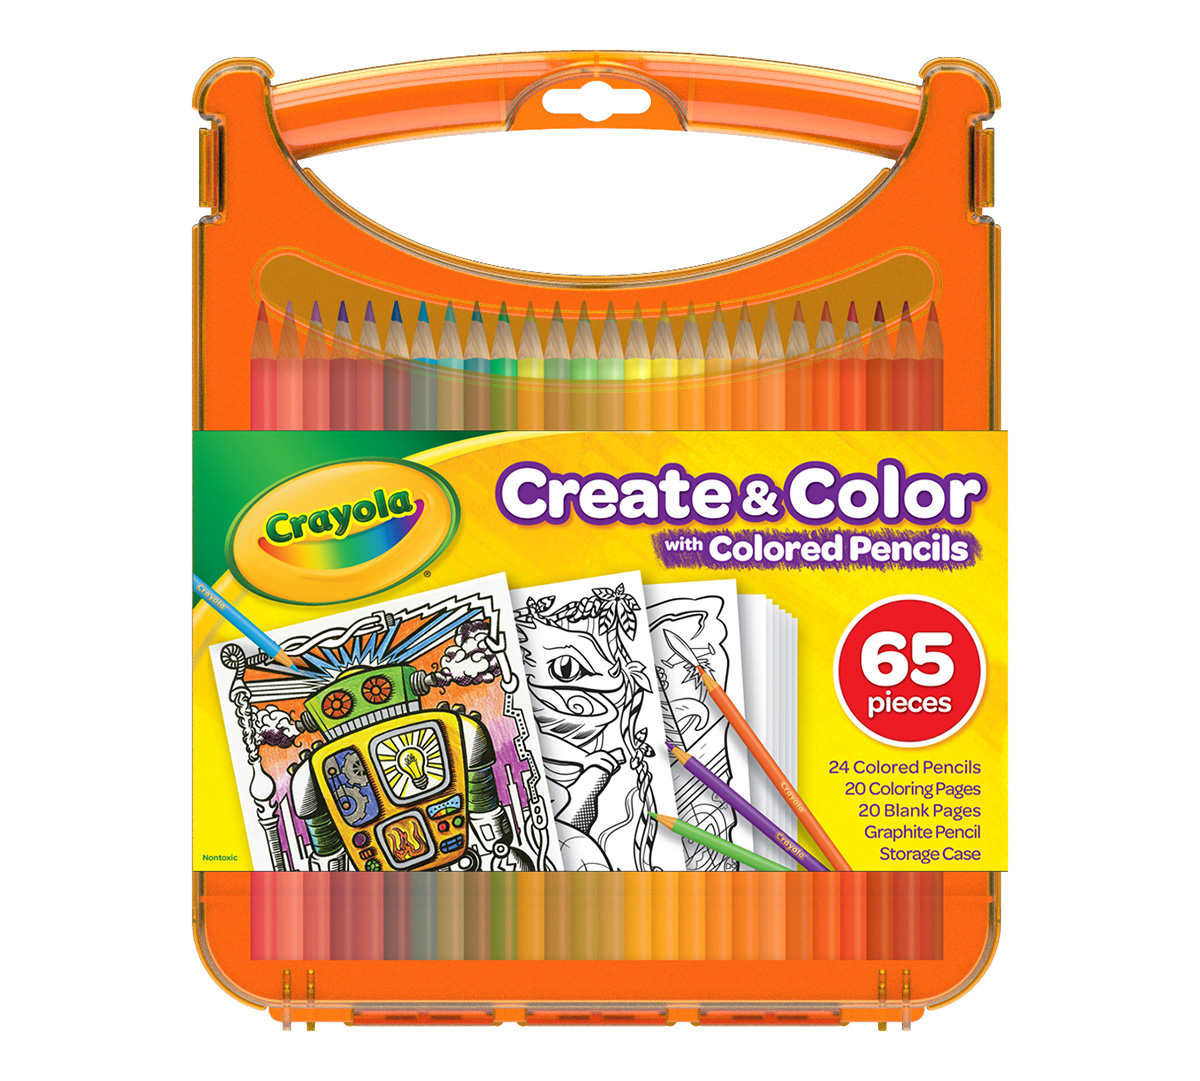 Download Crayola Create & Color Colored Pencil Kit, 25 Pencils, 40 Drawing and Activity Sheets, Plastic ...